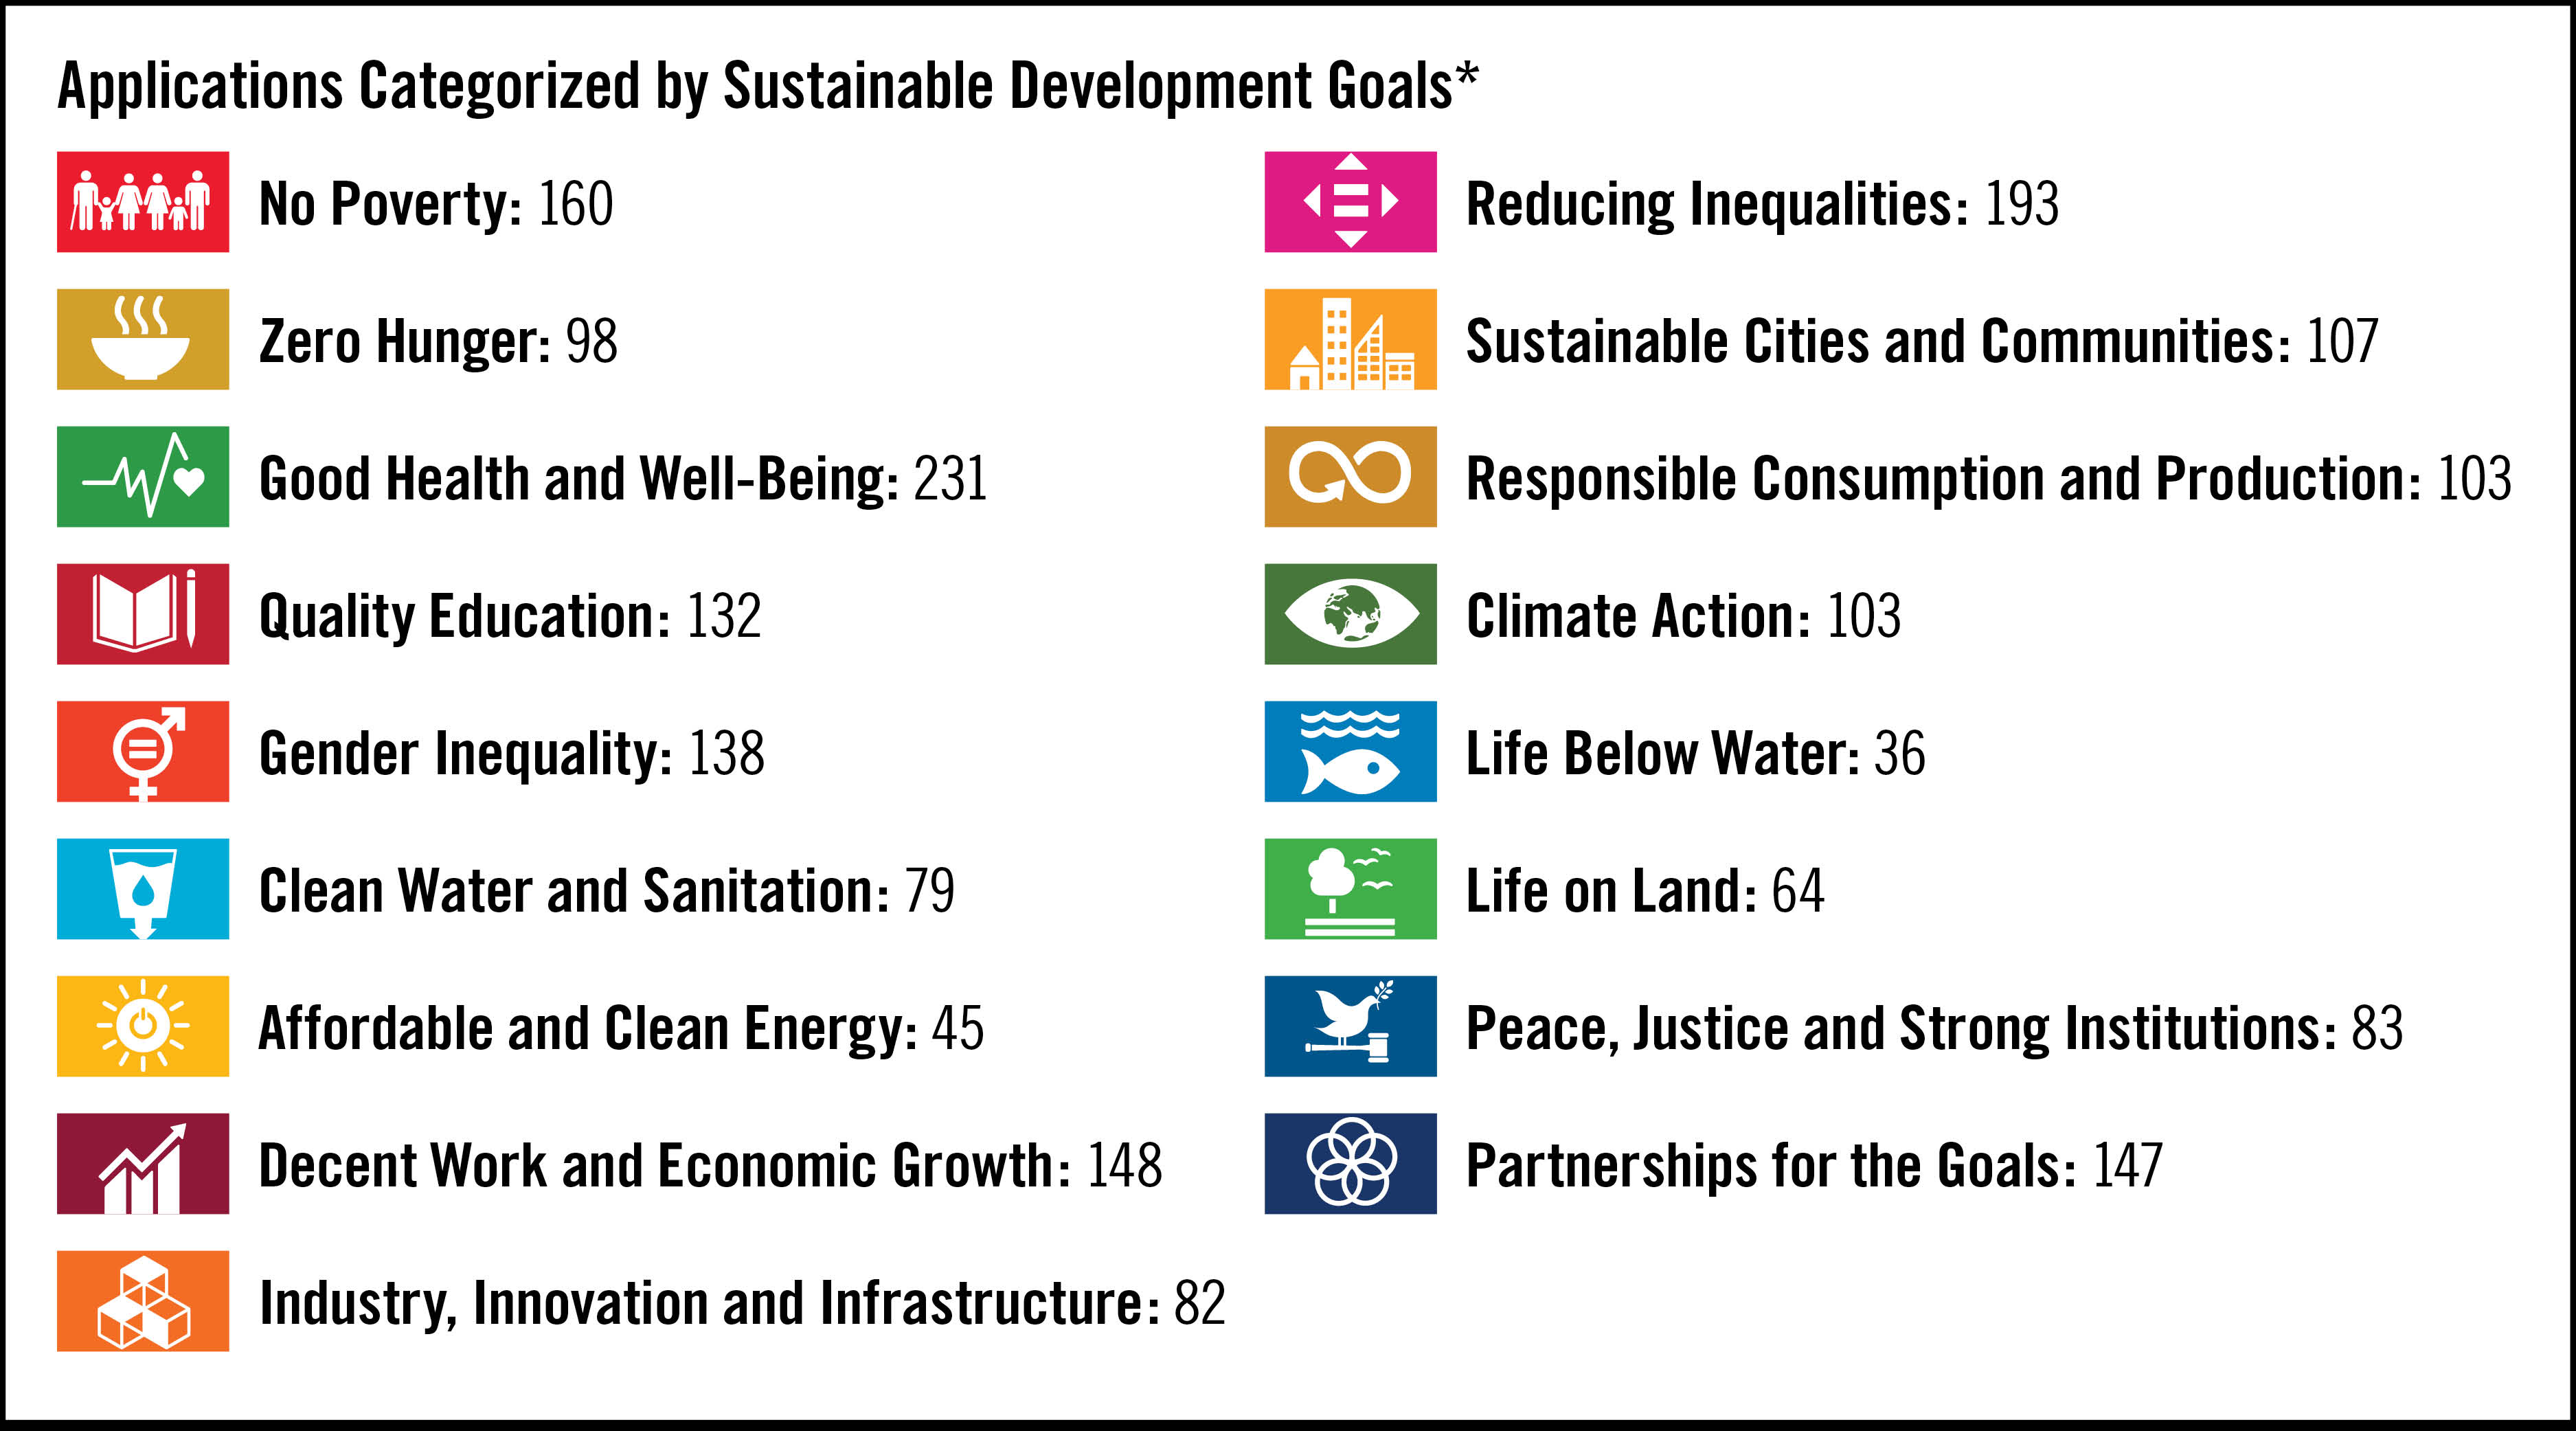 Applications_Categorize_By_Sustainable_Development_Goals_Infographic_Raw_Data_Table_Link_Below